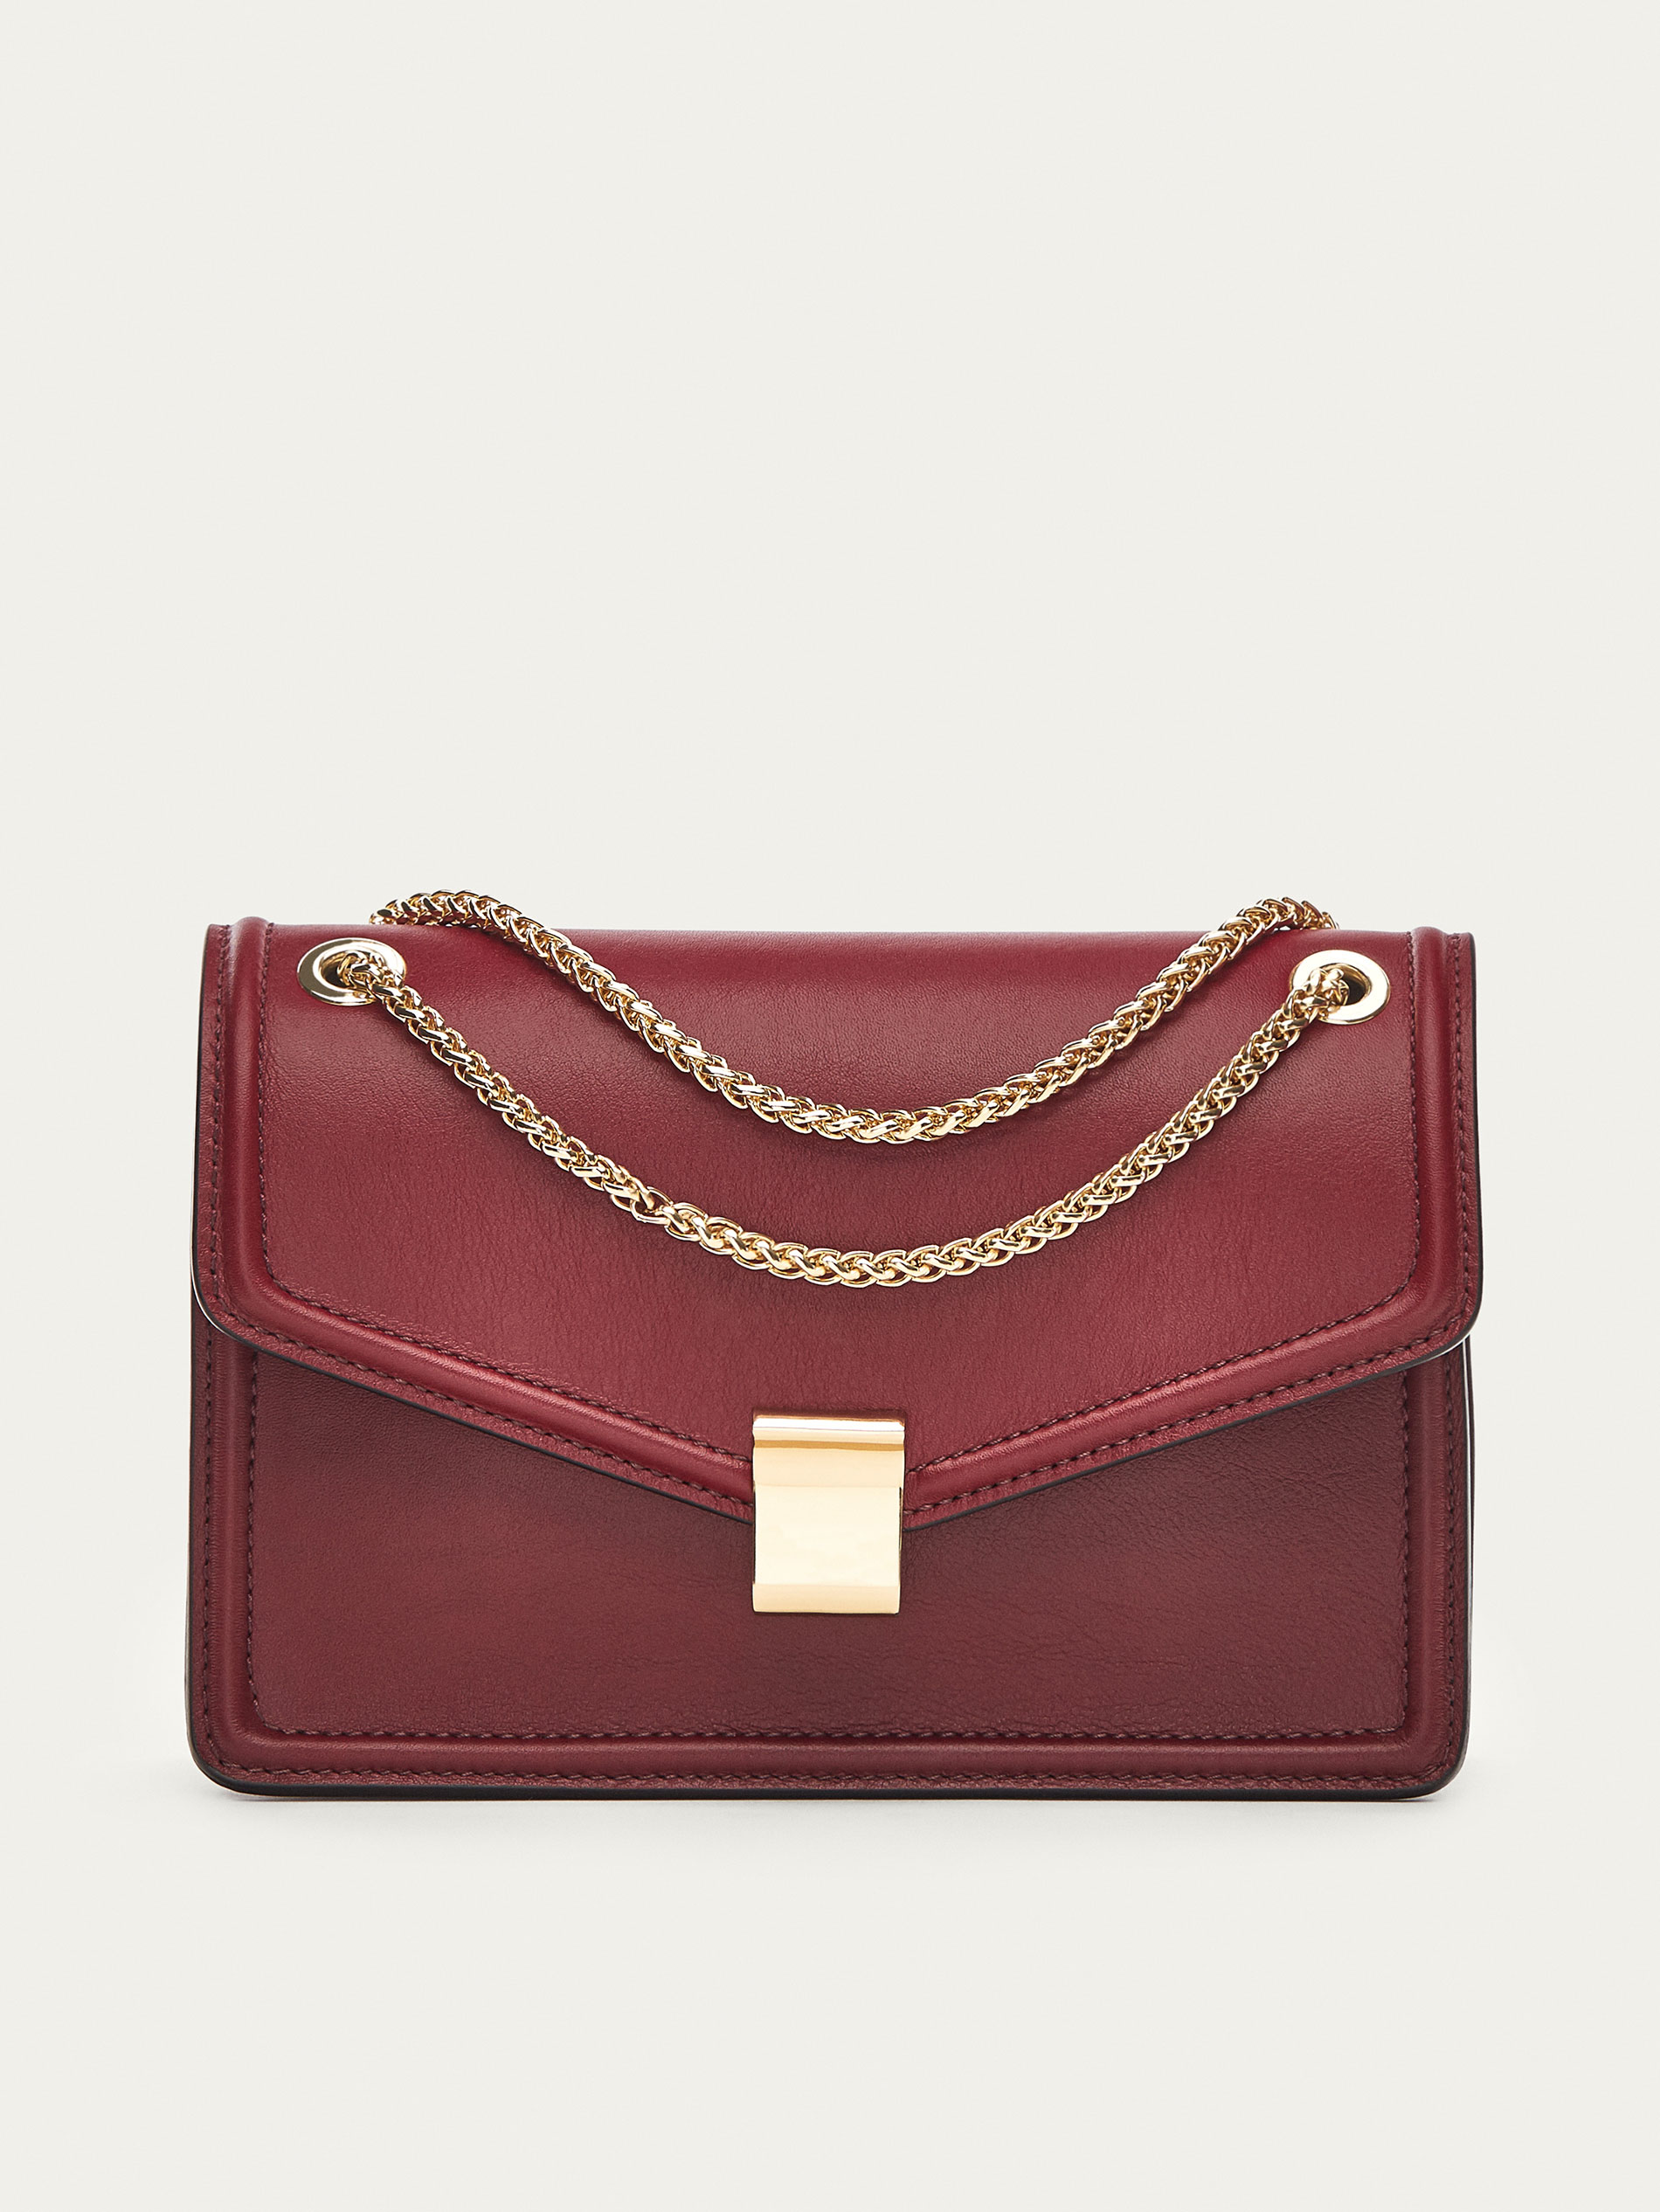 Massimo Dutti LEATHER CROSSBODY BAG WITH CHAIN DETAIL at £99.95 | love ...